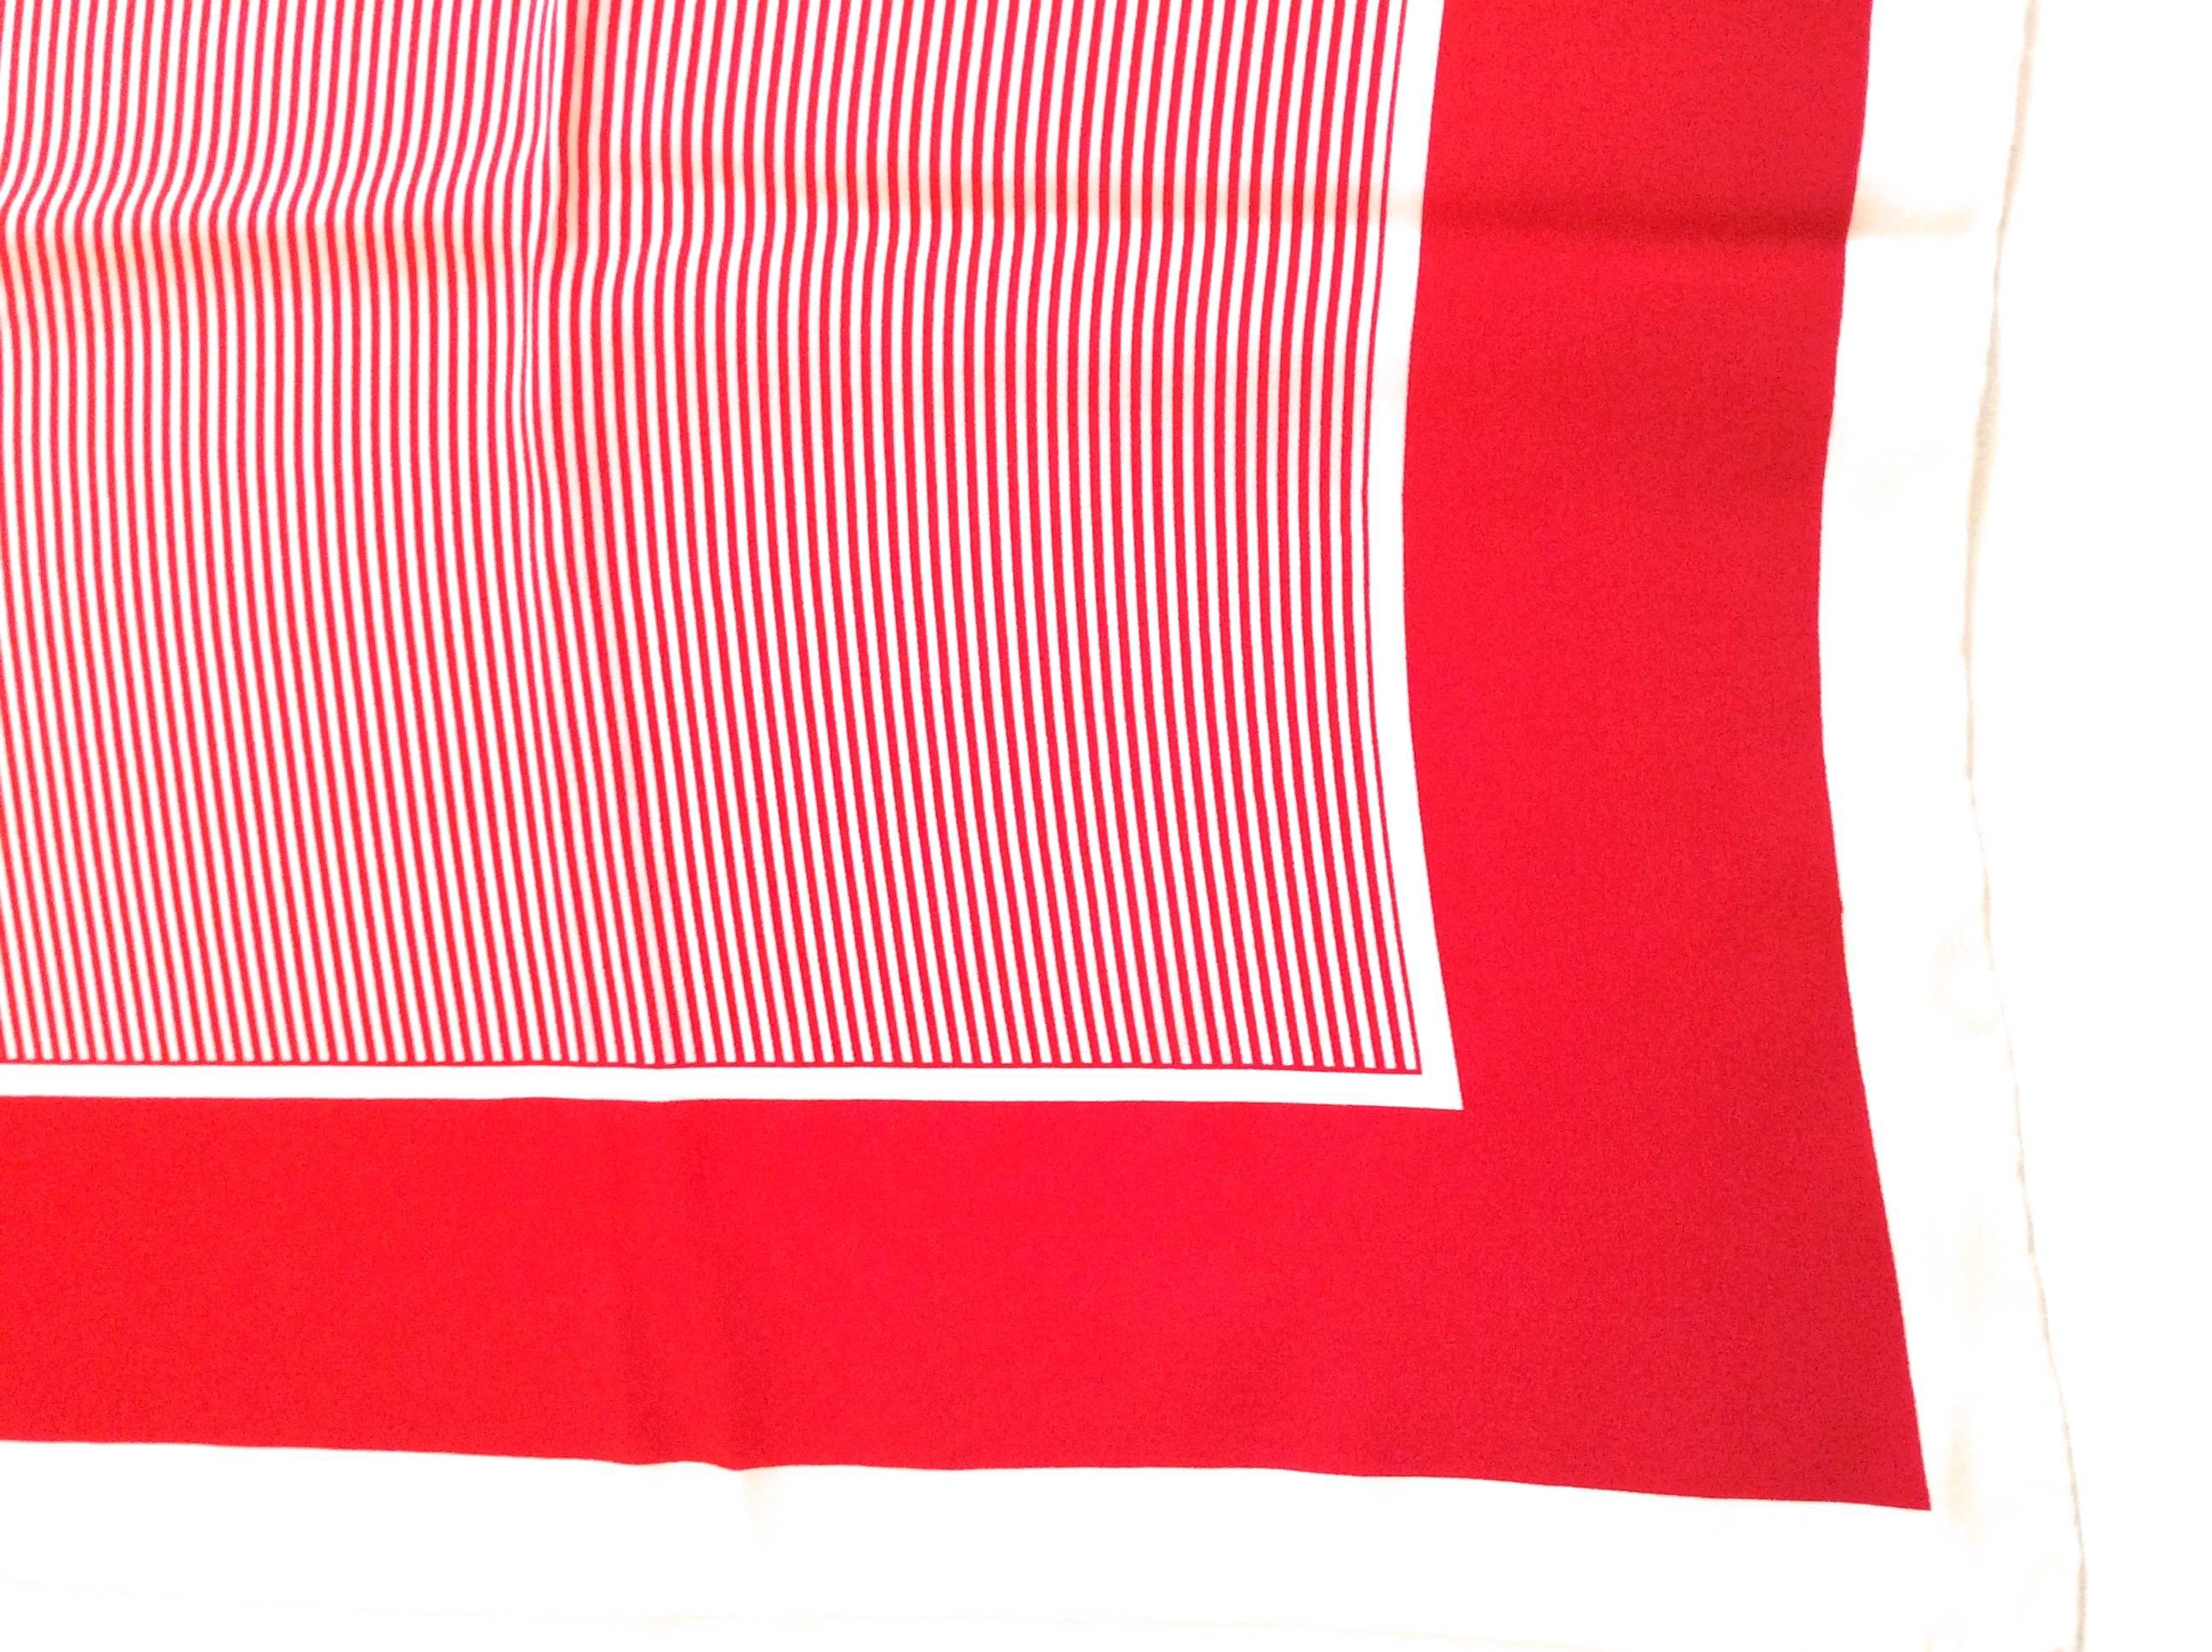 Yves Saint Laurent / YSL - 100% Silk Scarf - 1970's - Red and White For Sale 1